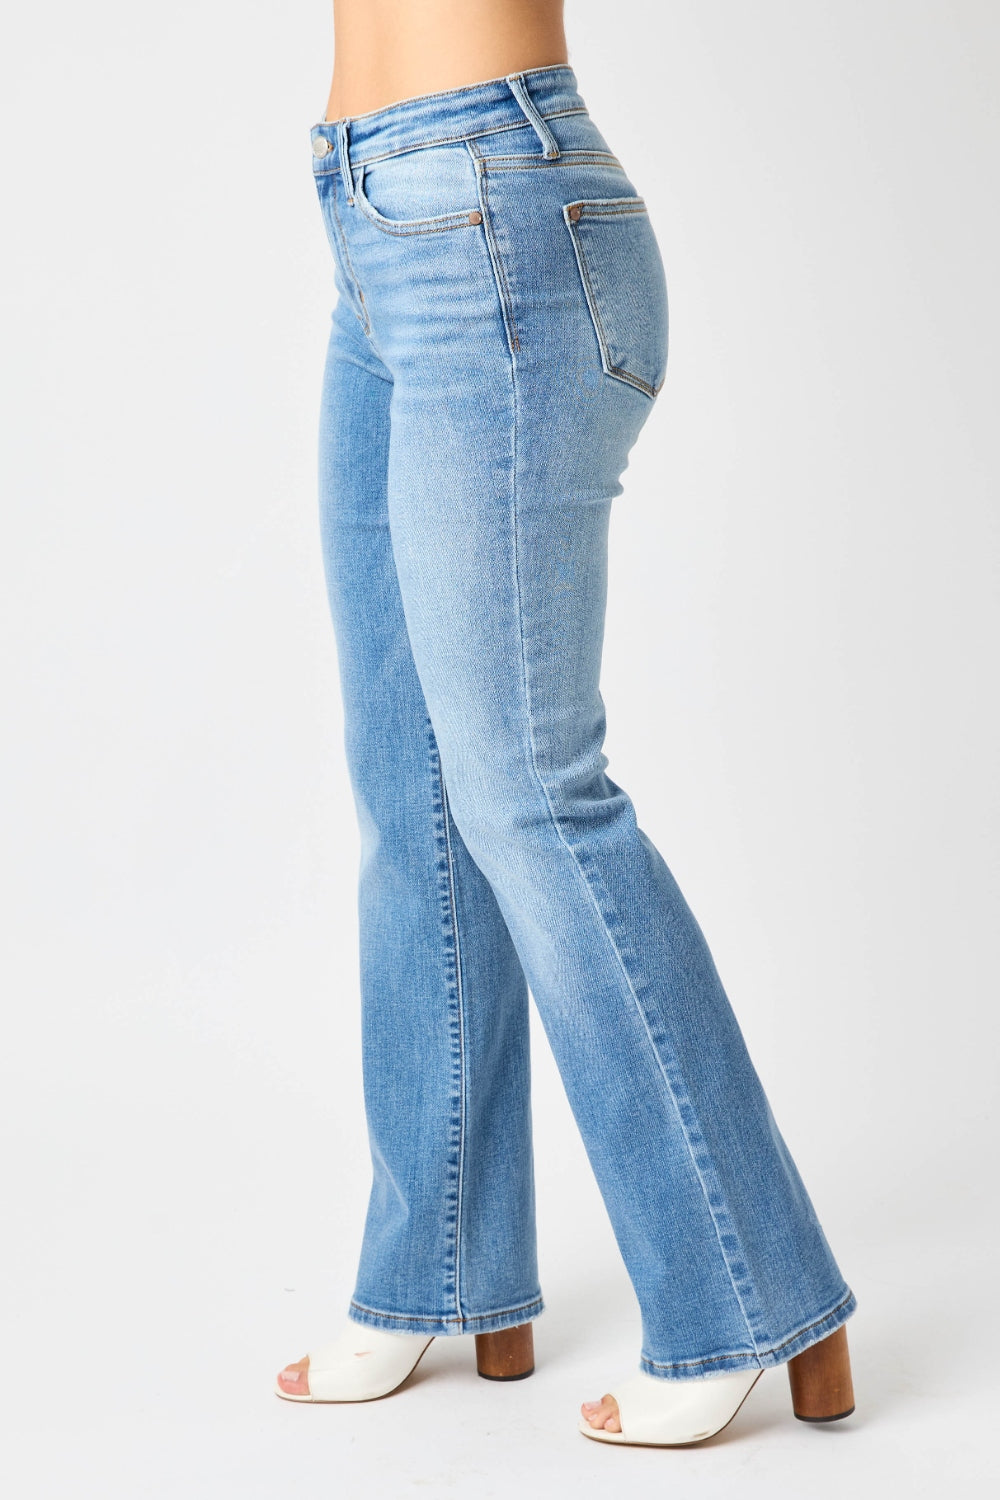 Judy Blue Full Size High Waist Straight Jeans - Sybaritic Bags & Clothing